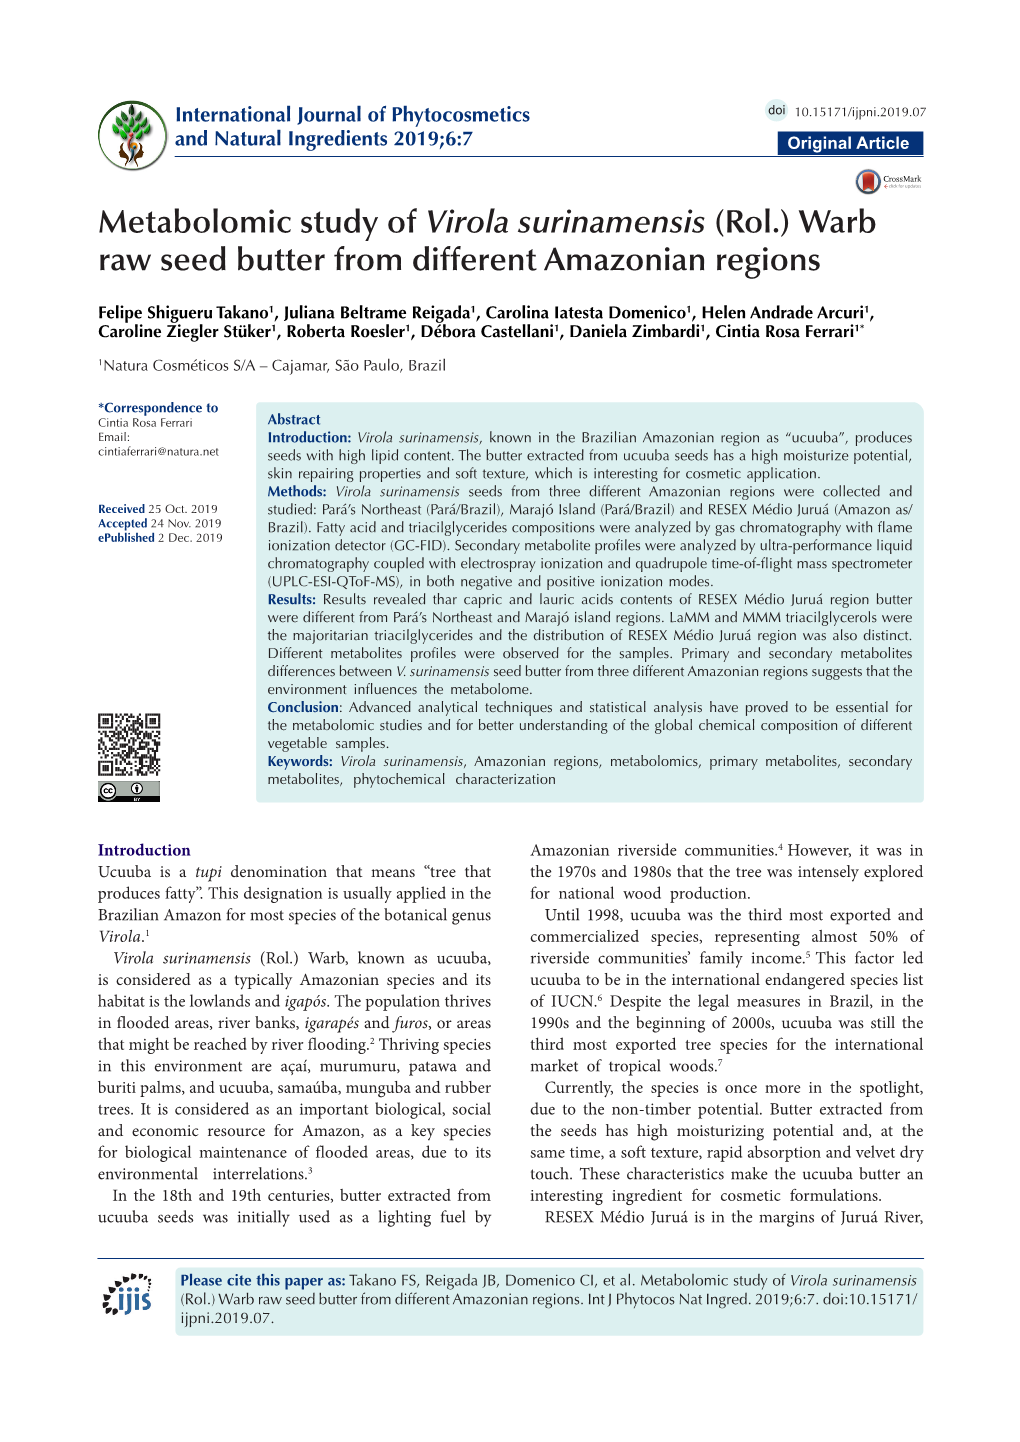 Metabolomic Study of Virola Surinamensis (Rol.) Warb Raw Seed Butter from Different Amazonian Regions